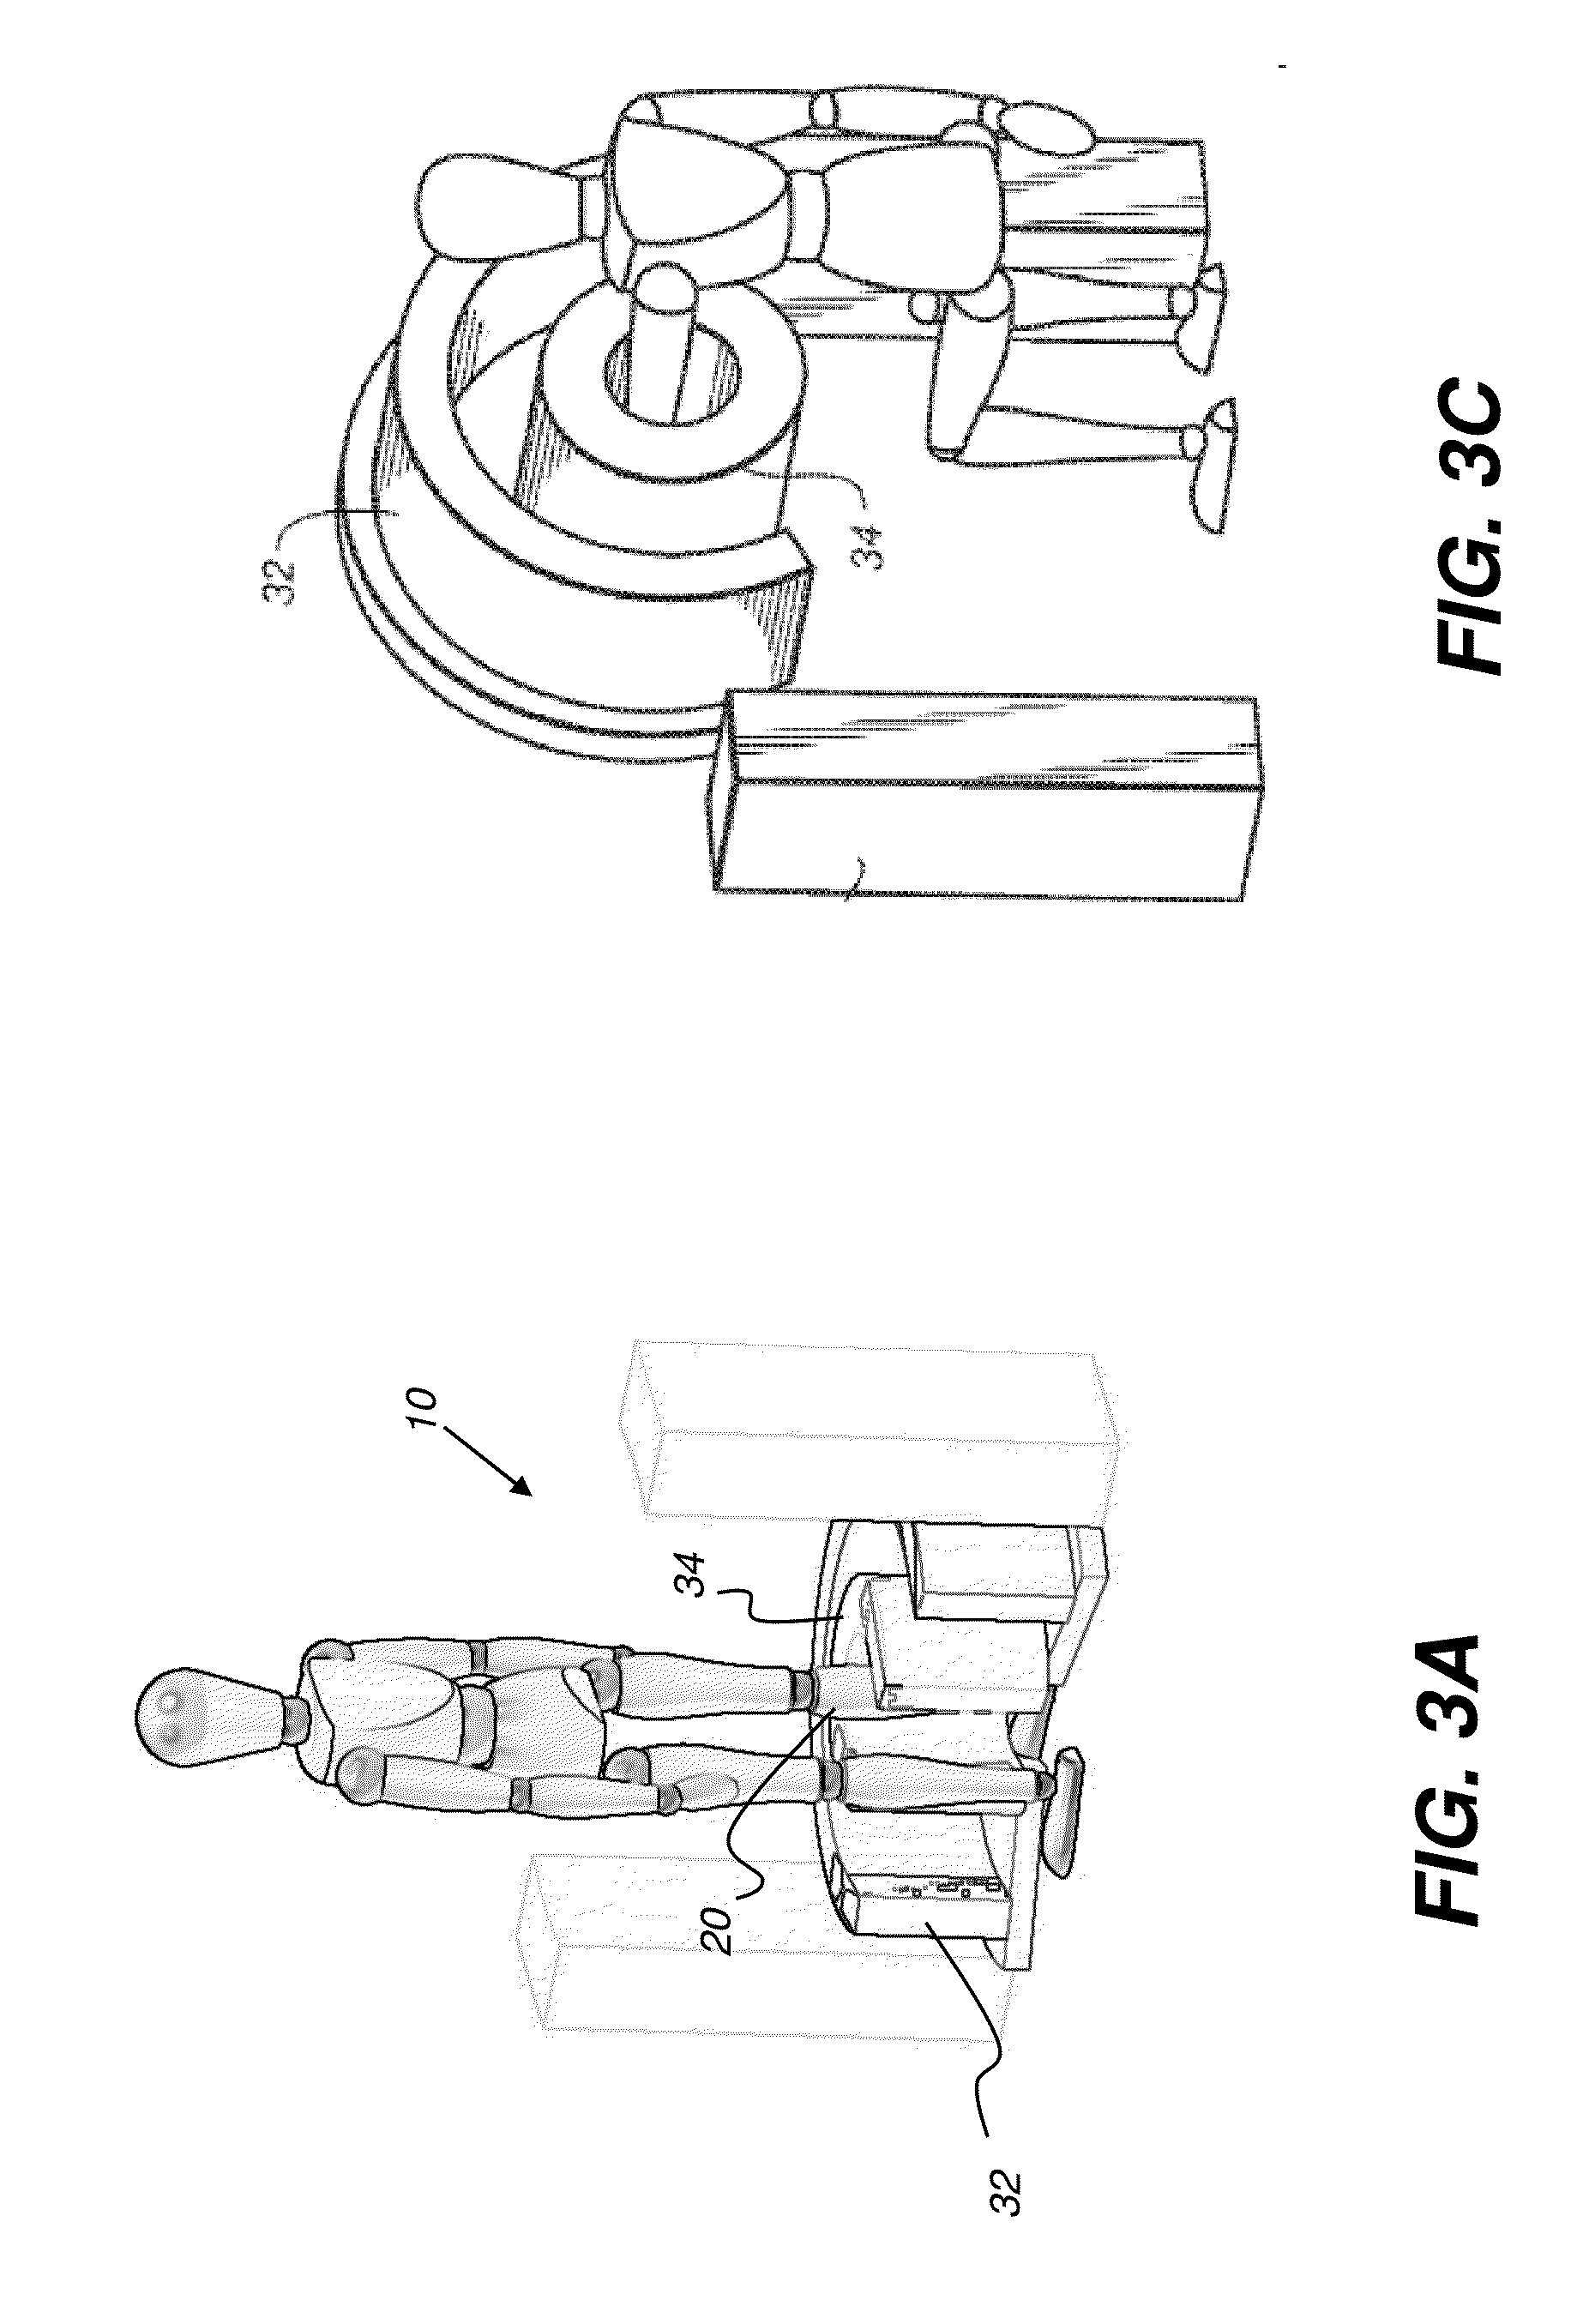 Extremity imaging apparatus for cone beam computed tomography